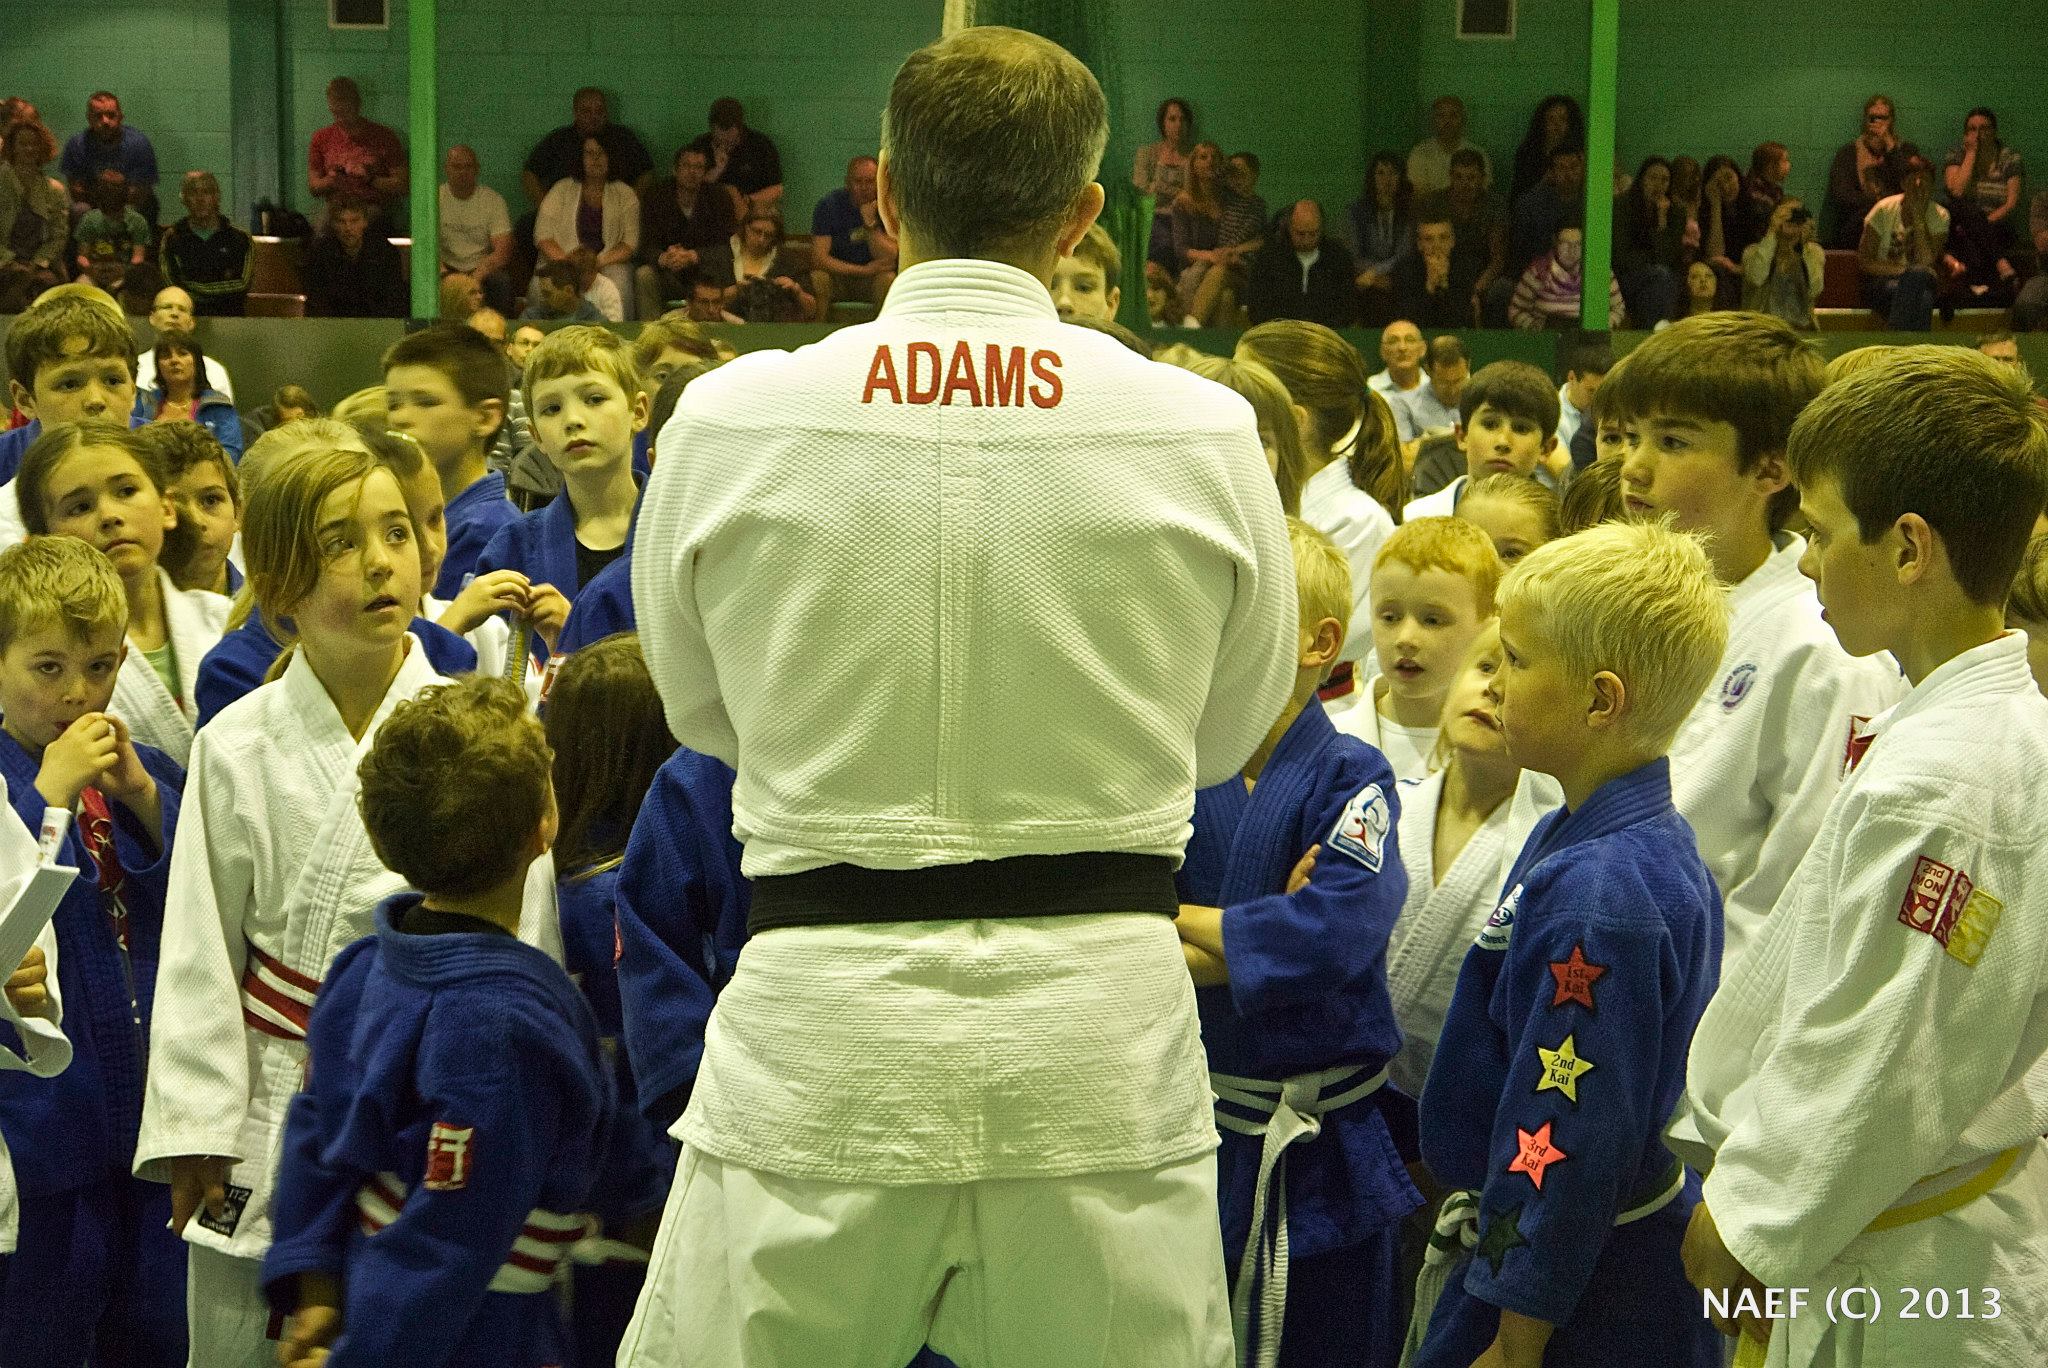 What’s it Like to Train Judo in Japan? Judo Legend Neil Adams Shares his Harsh Experience